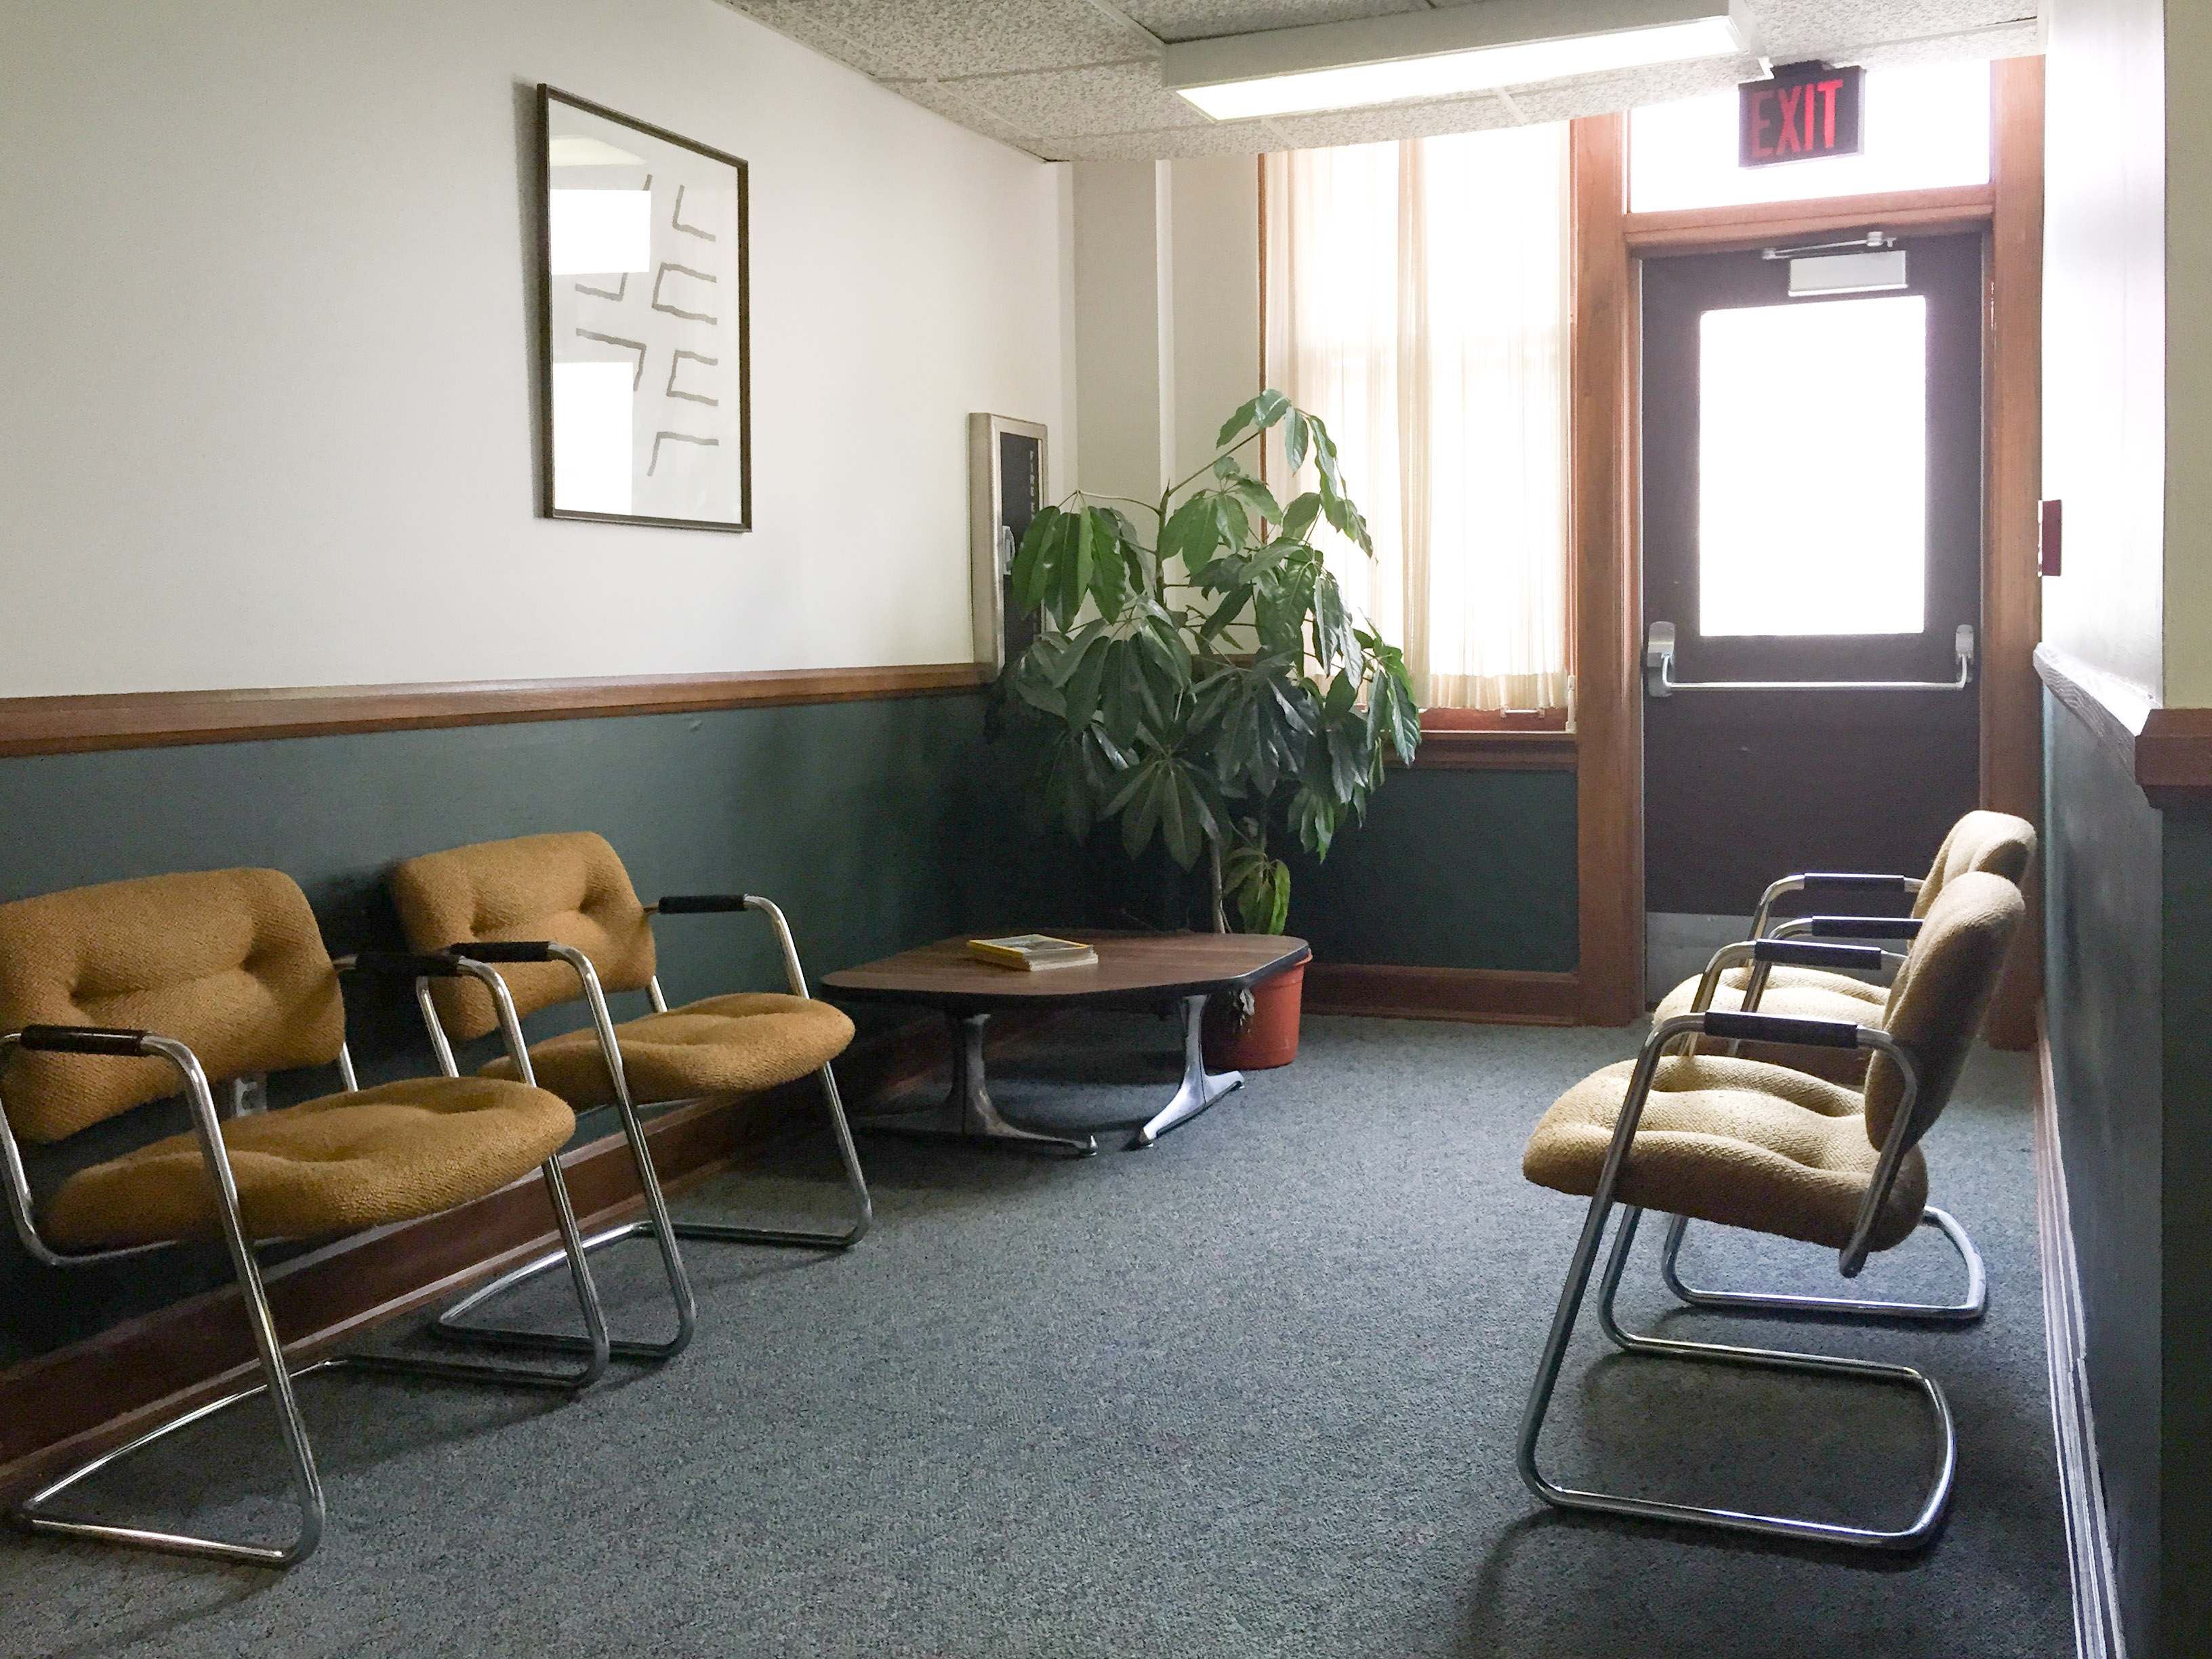 A waiting area serves all of our offices.